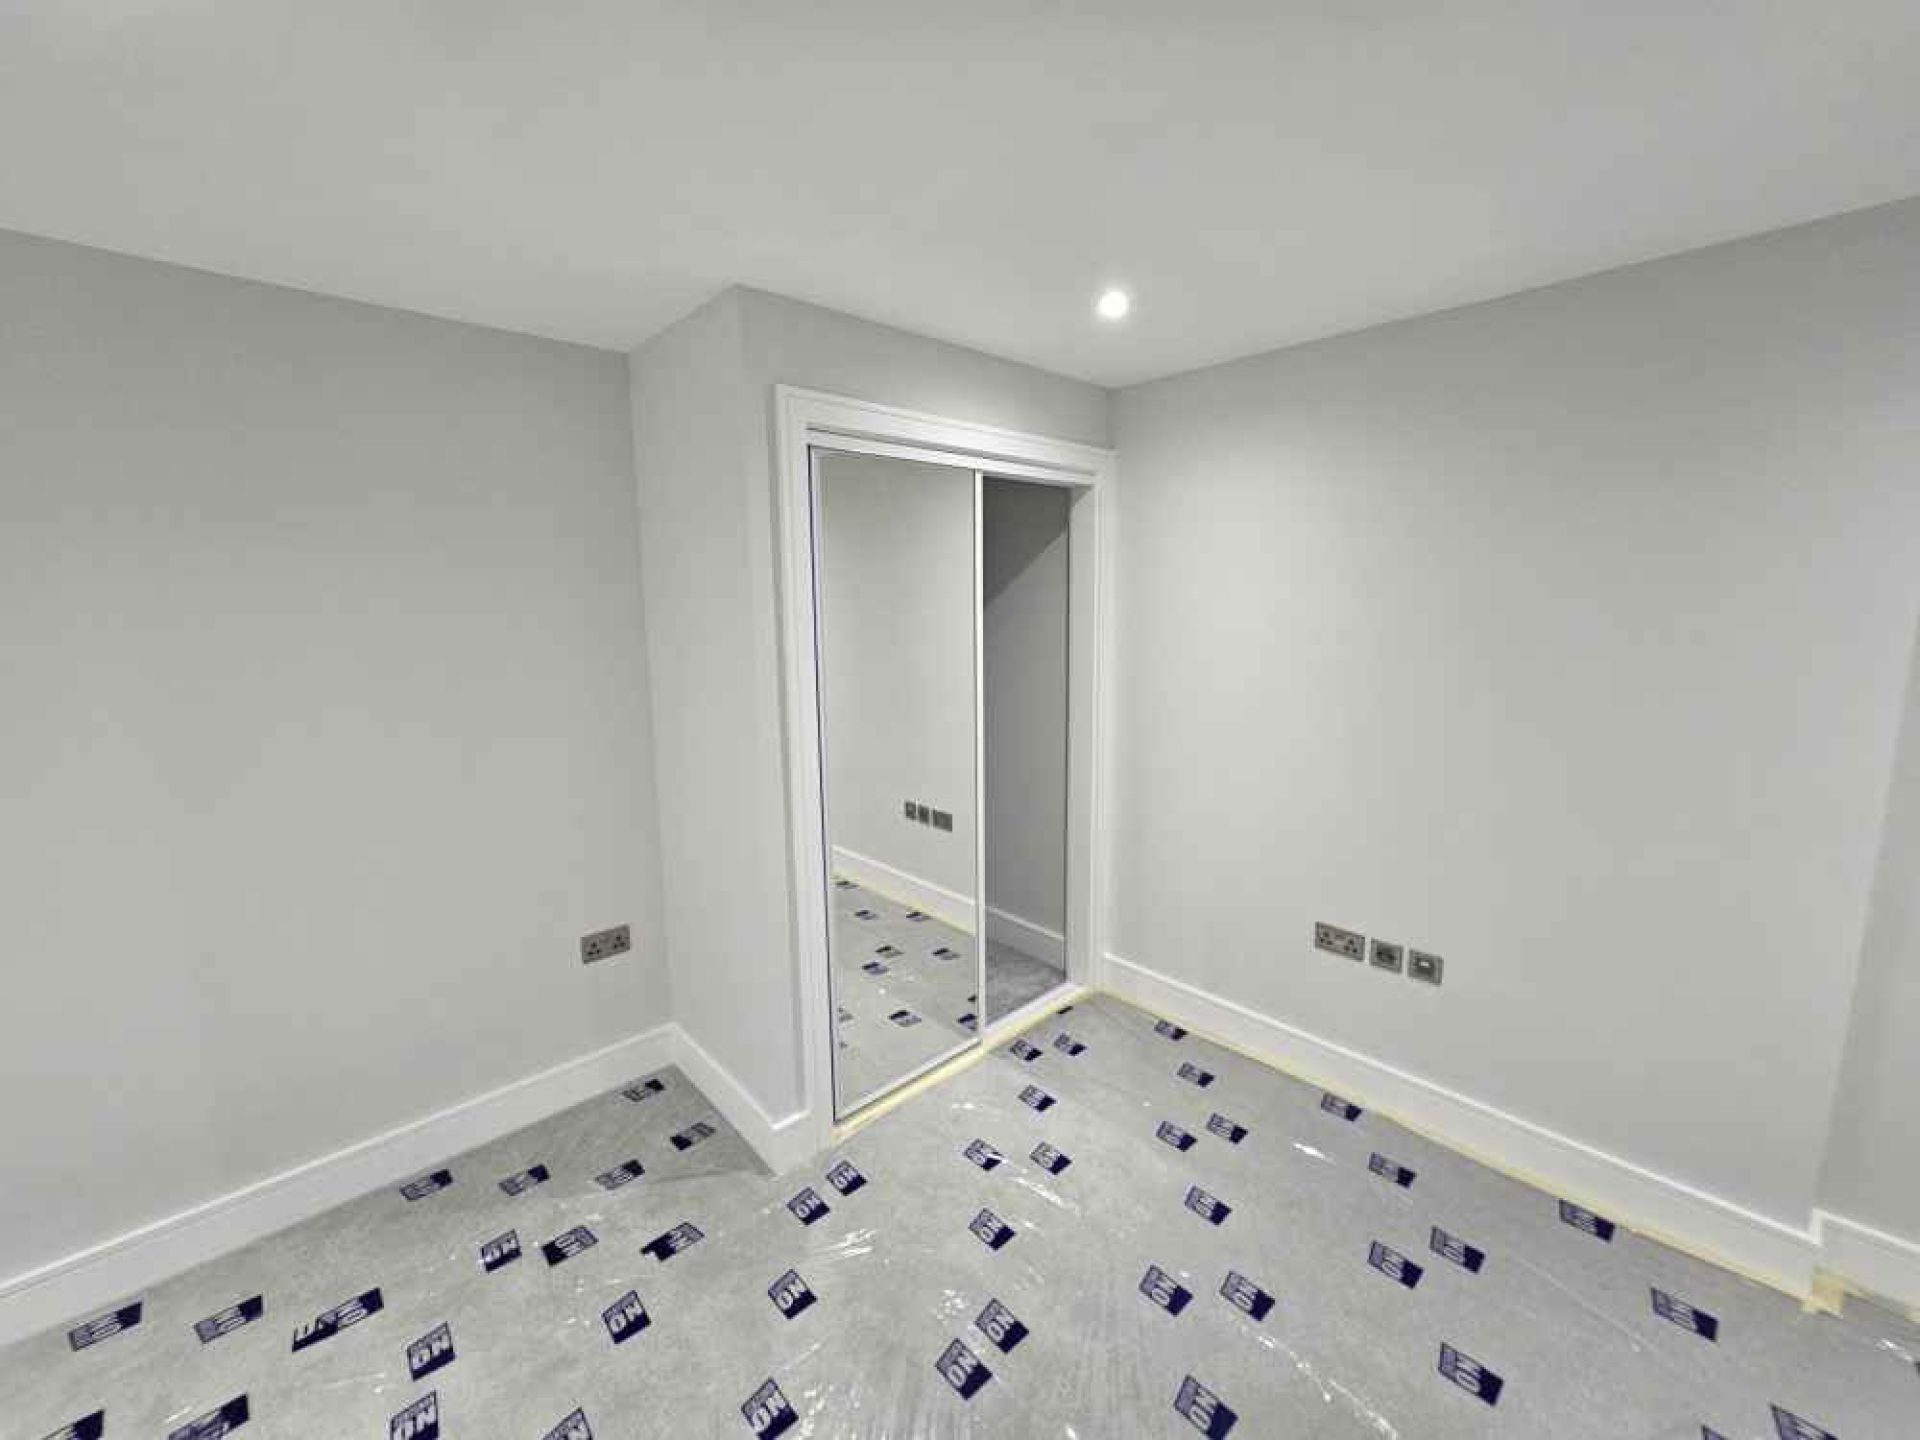 Completed flat at pegs lane london from the inside. White walls and spot lighting.